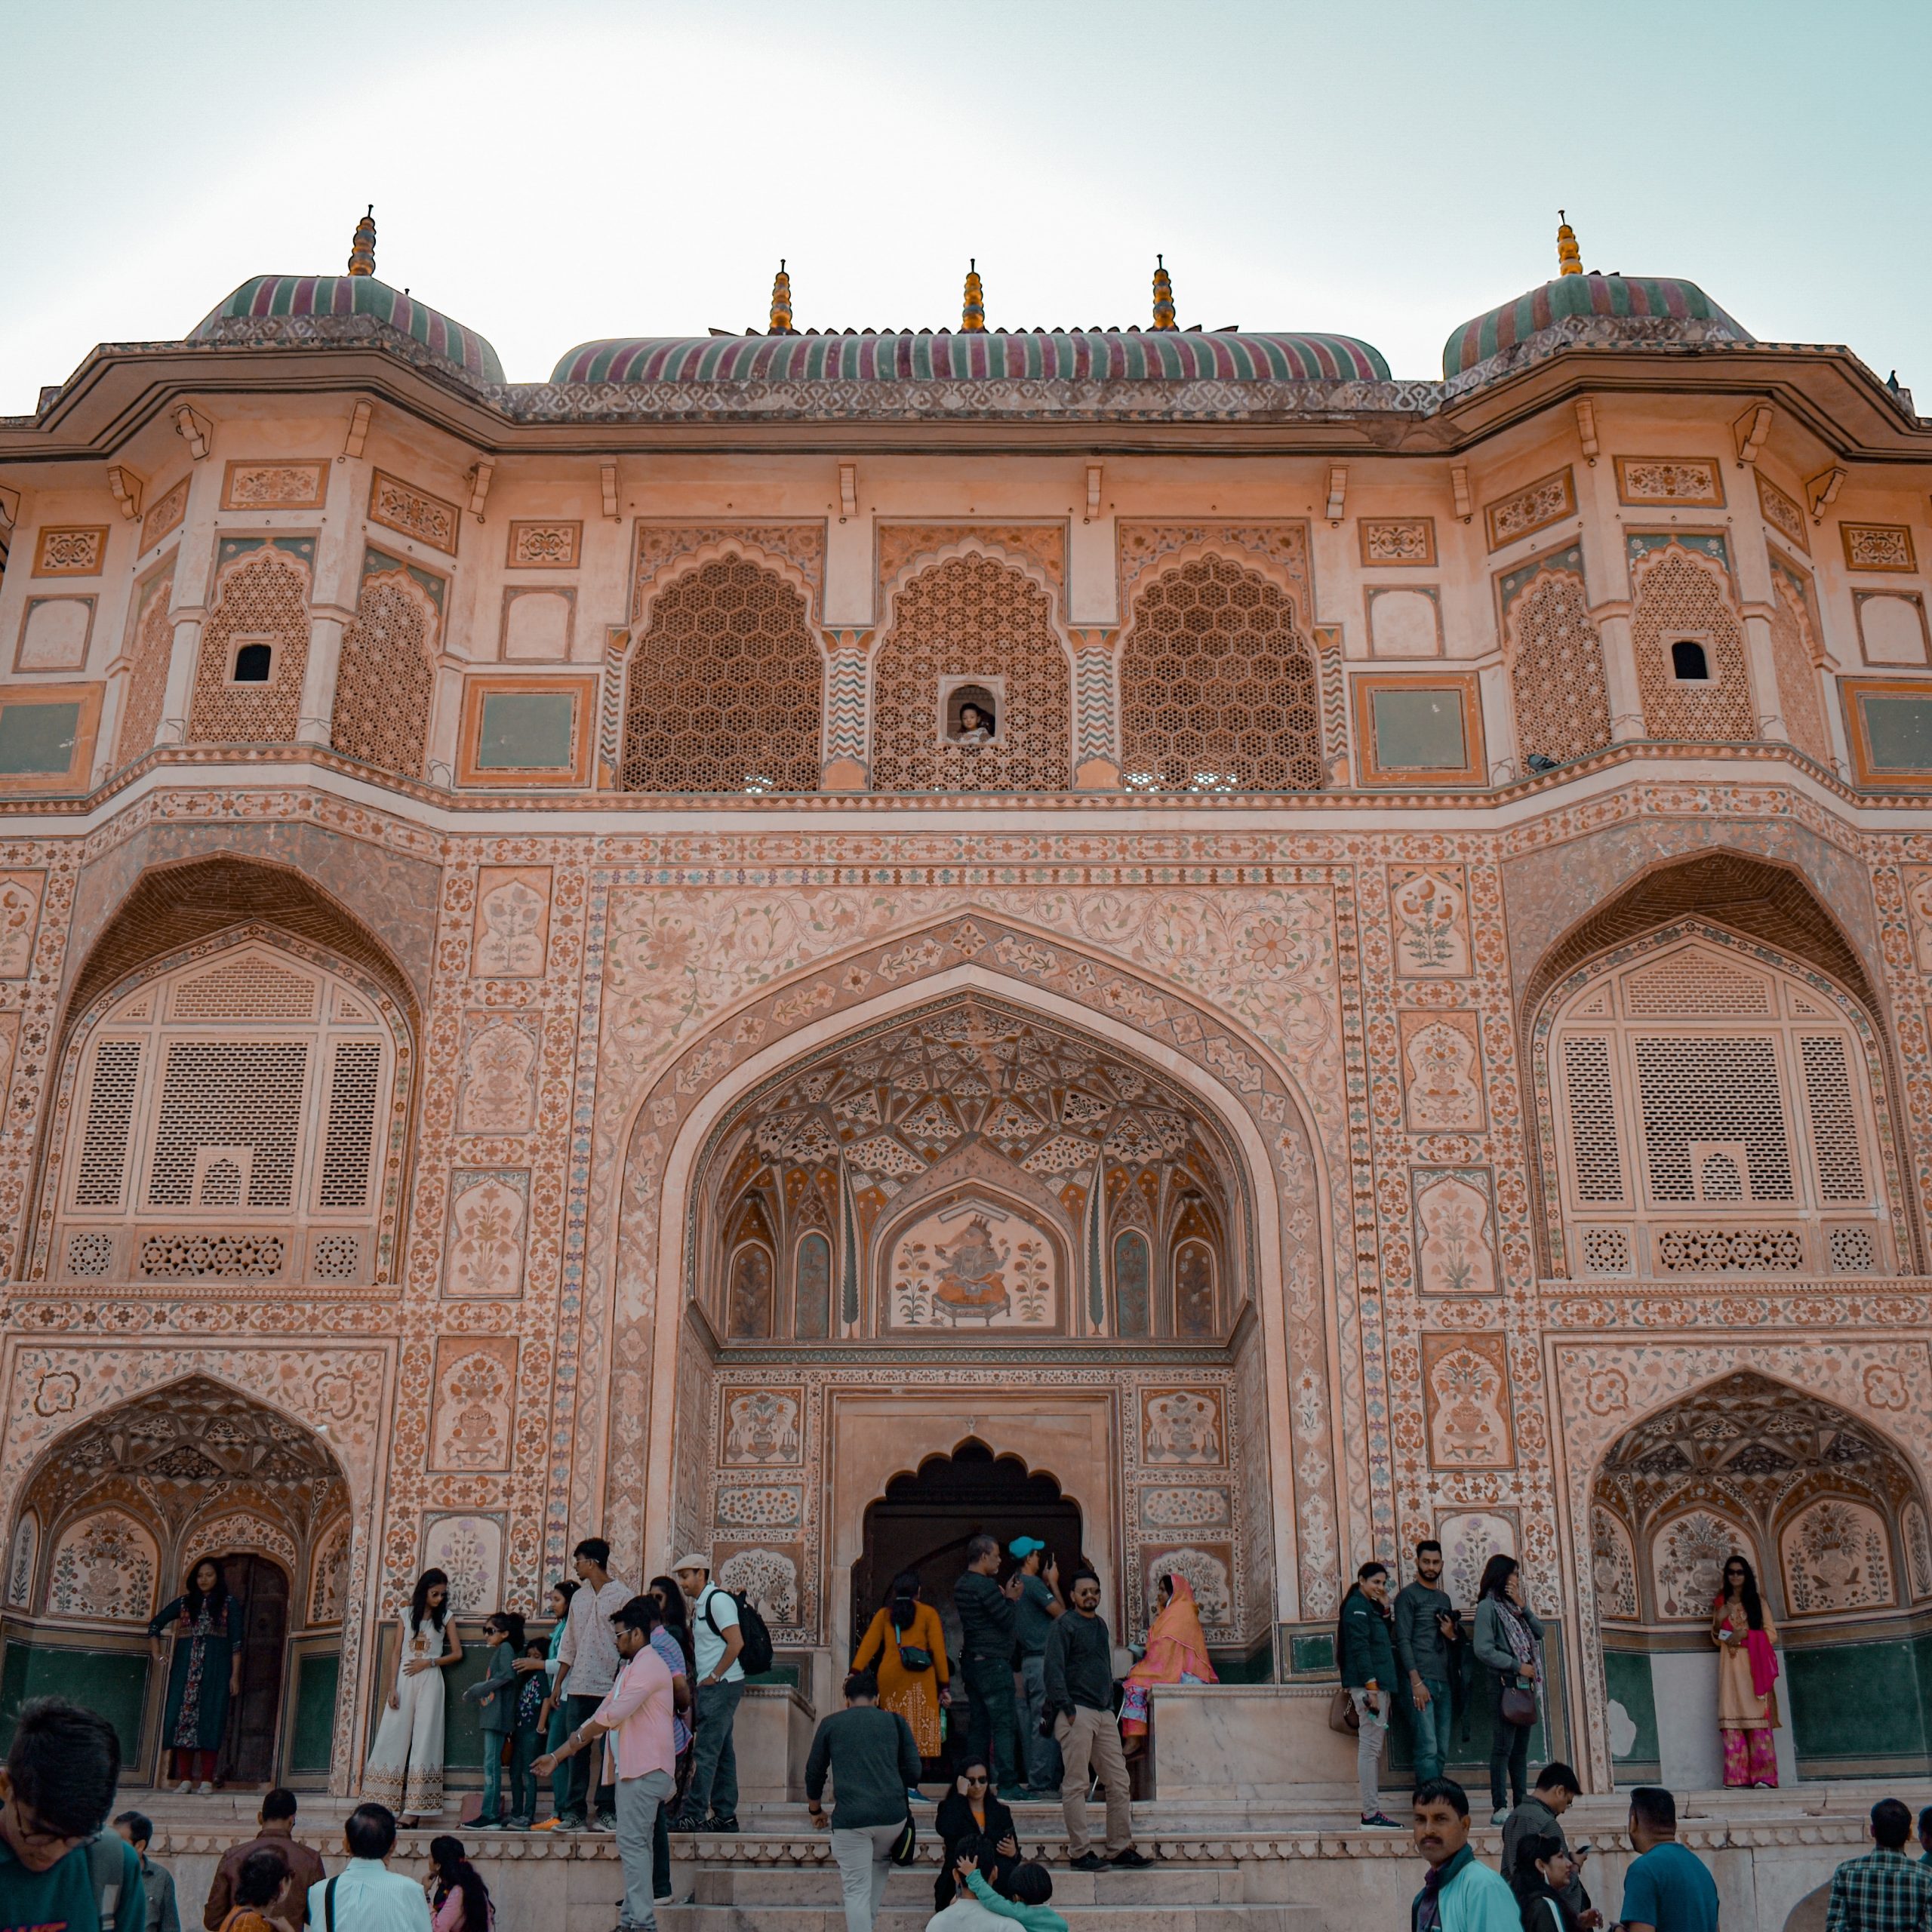 Day 1: Arrival in Jaipur and Amber Fort Exploration